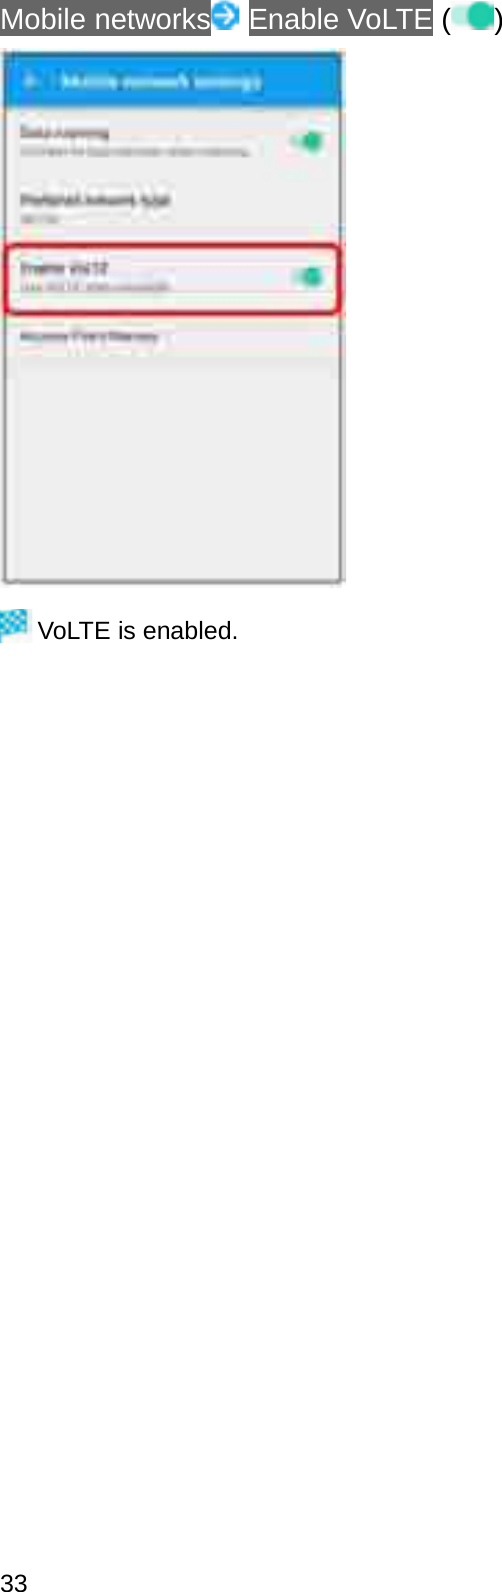 Mobile networks Enable VoLTE ( )VoLTE is enabled.33